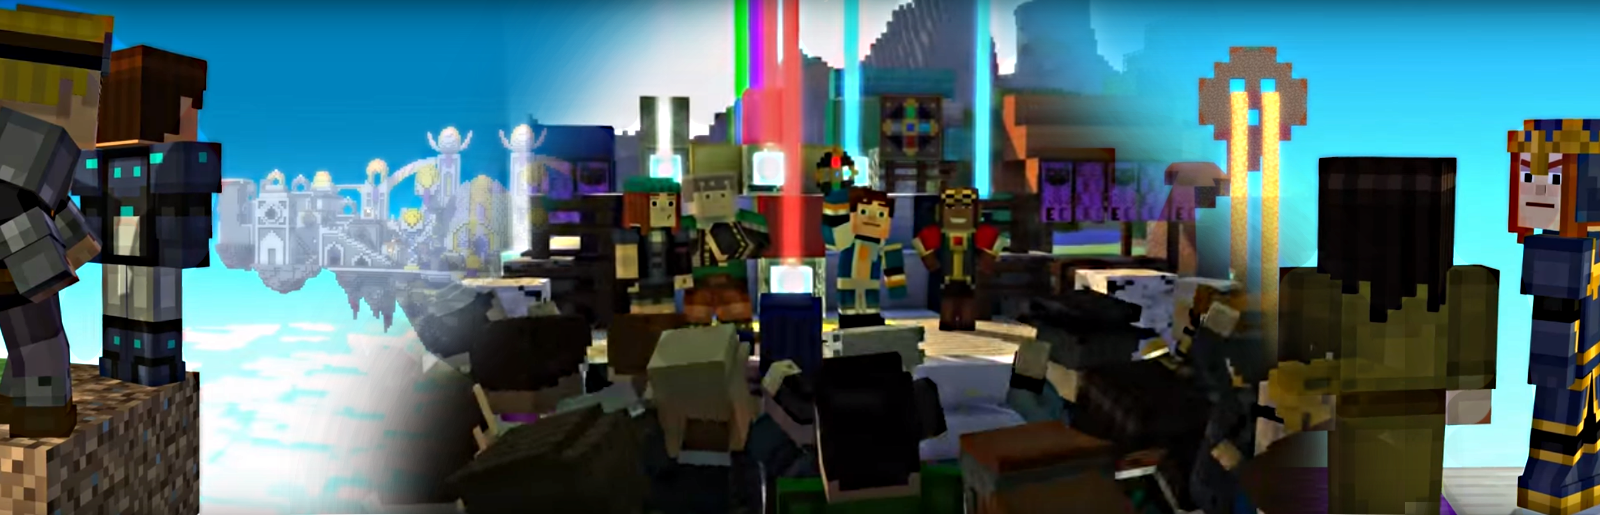 Review: MINECRAFT: STORY MODE (Episode 5) – Spoilerfrei!